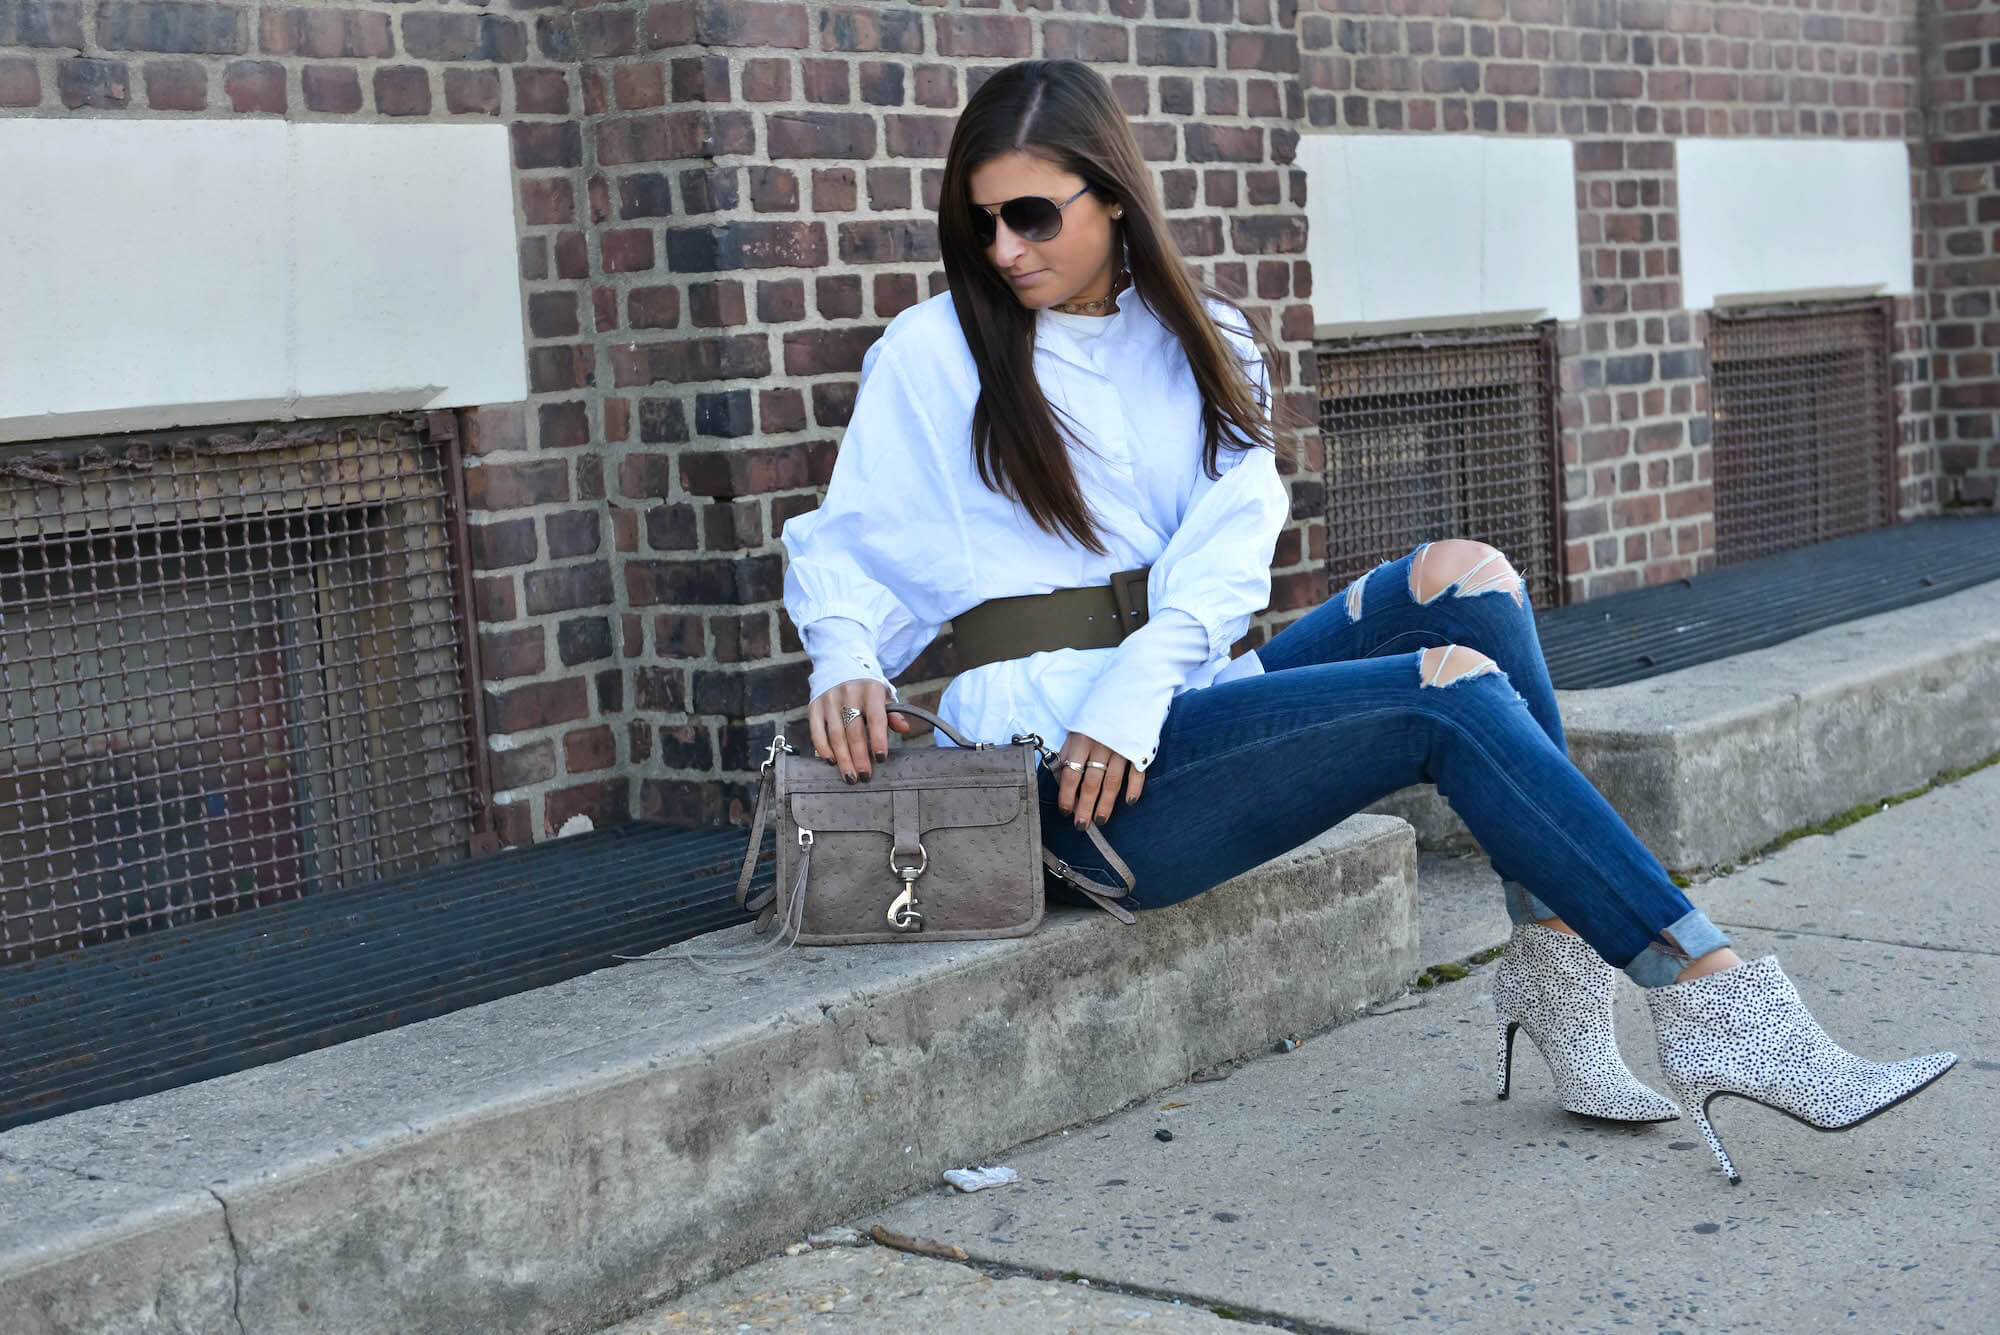 To Be Bright by Tilden Brighton - Denim & White Top Outfit, Fall Fashion